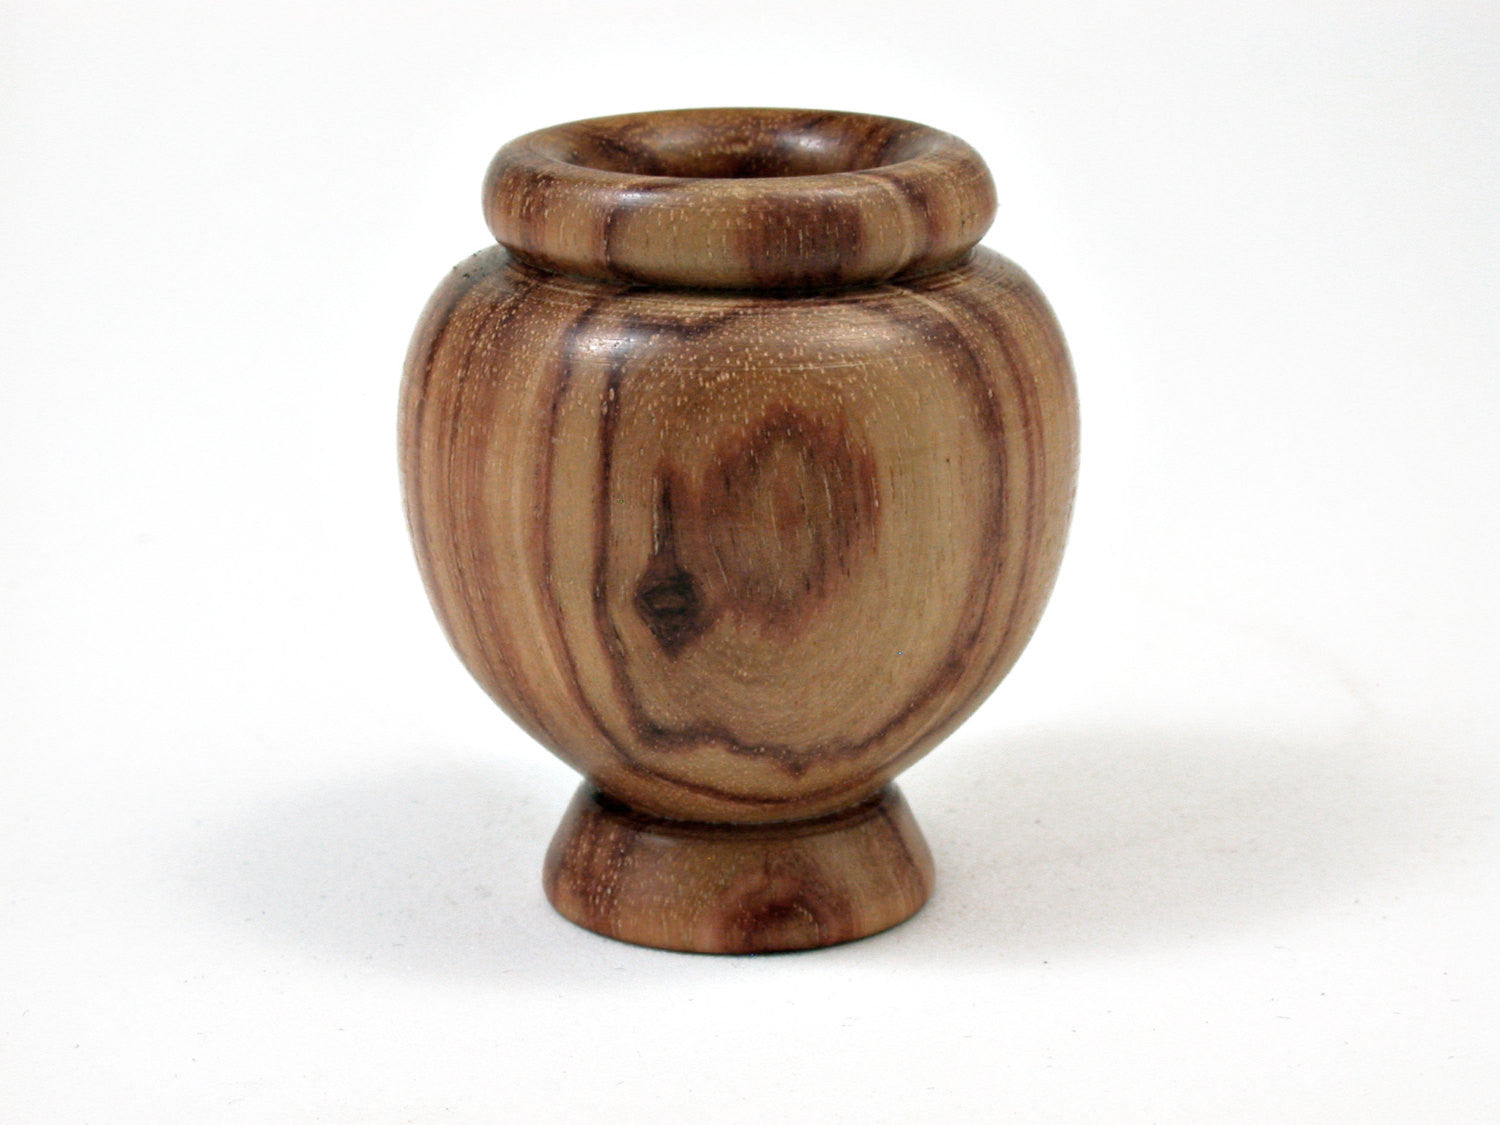 LV-0365 Tulipwood Miniature Wooden Vase, Footed Bowl, Hollow Form-CUTE